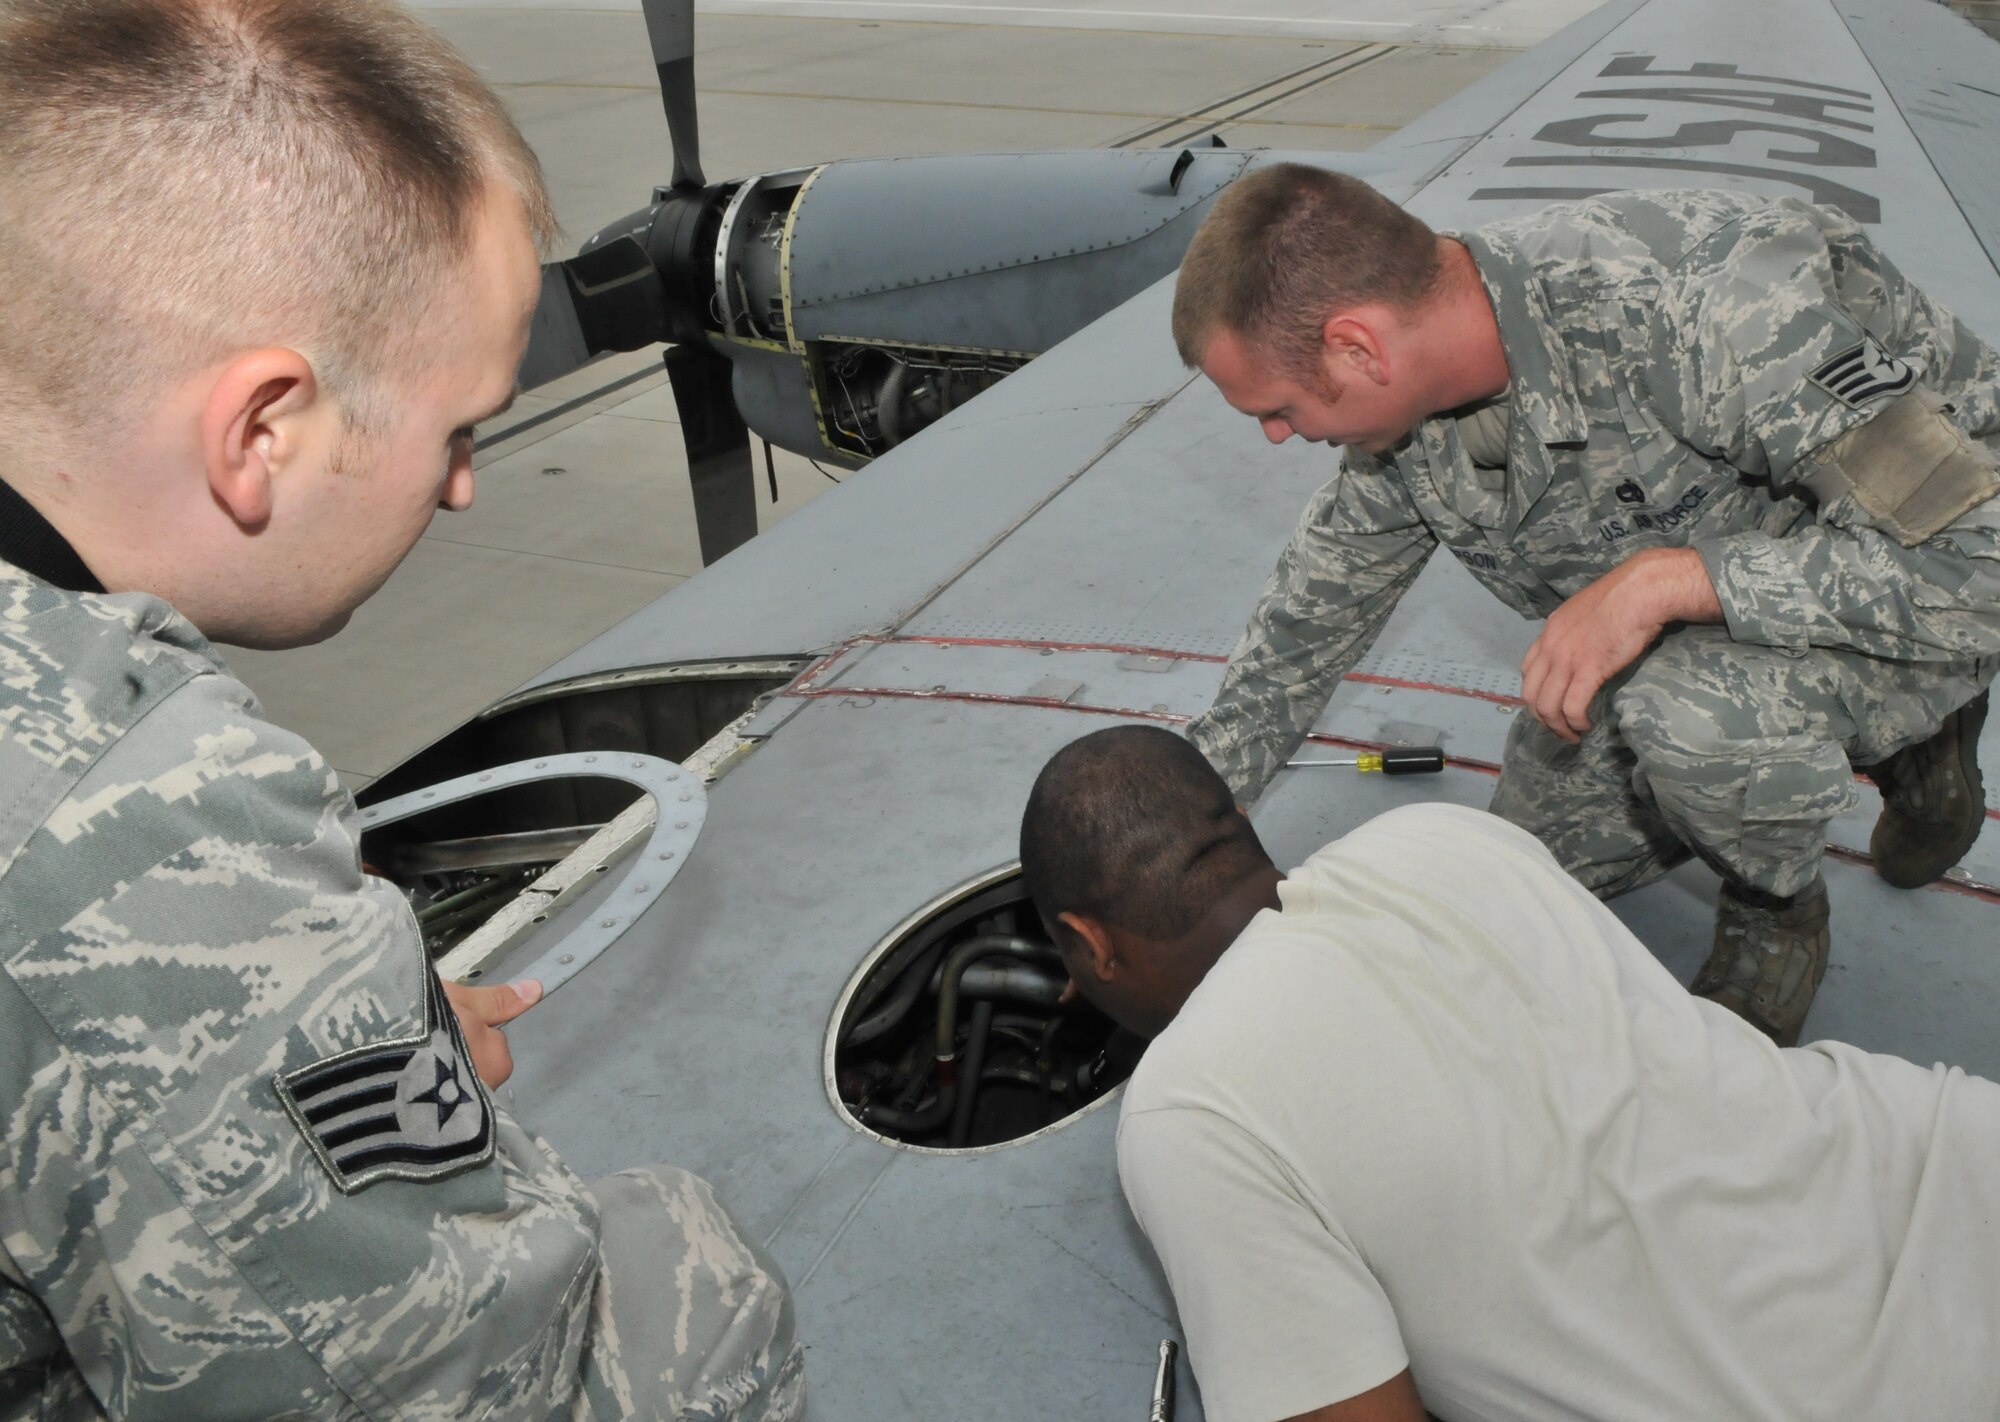 U.S. Air Force aircraft maintainers from the 86th Maintenance Squadron perform an isochronical inspection on a C-130E Hercules, July 22, 2009, Ramstein Air Base, Germany. This is the final ISO inspection on the C-130E Hercules on Ramstein as the base continues to replace the C-130E with the new C-130J Super Hercules. (U.S. Air Force photo by Senior Airman Nathan Lipscomb)